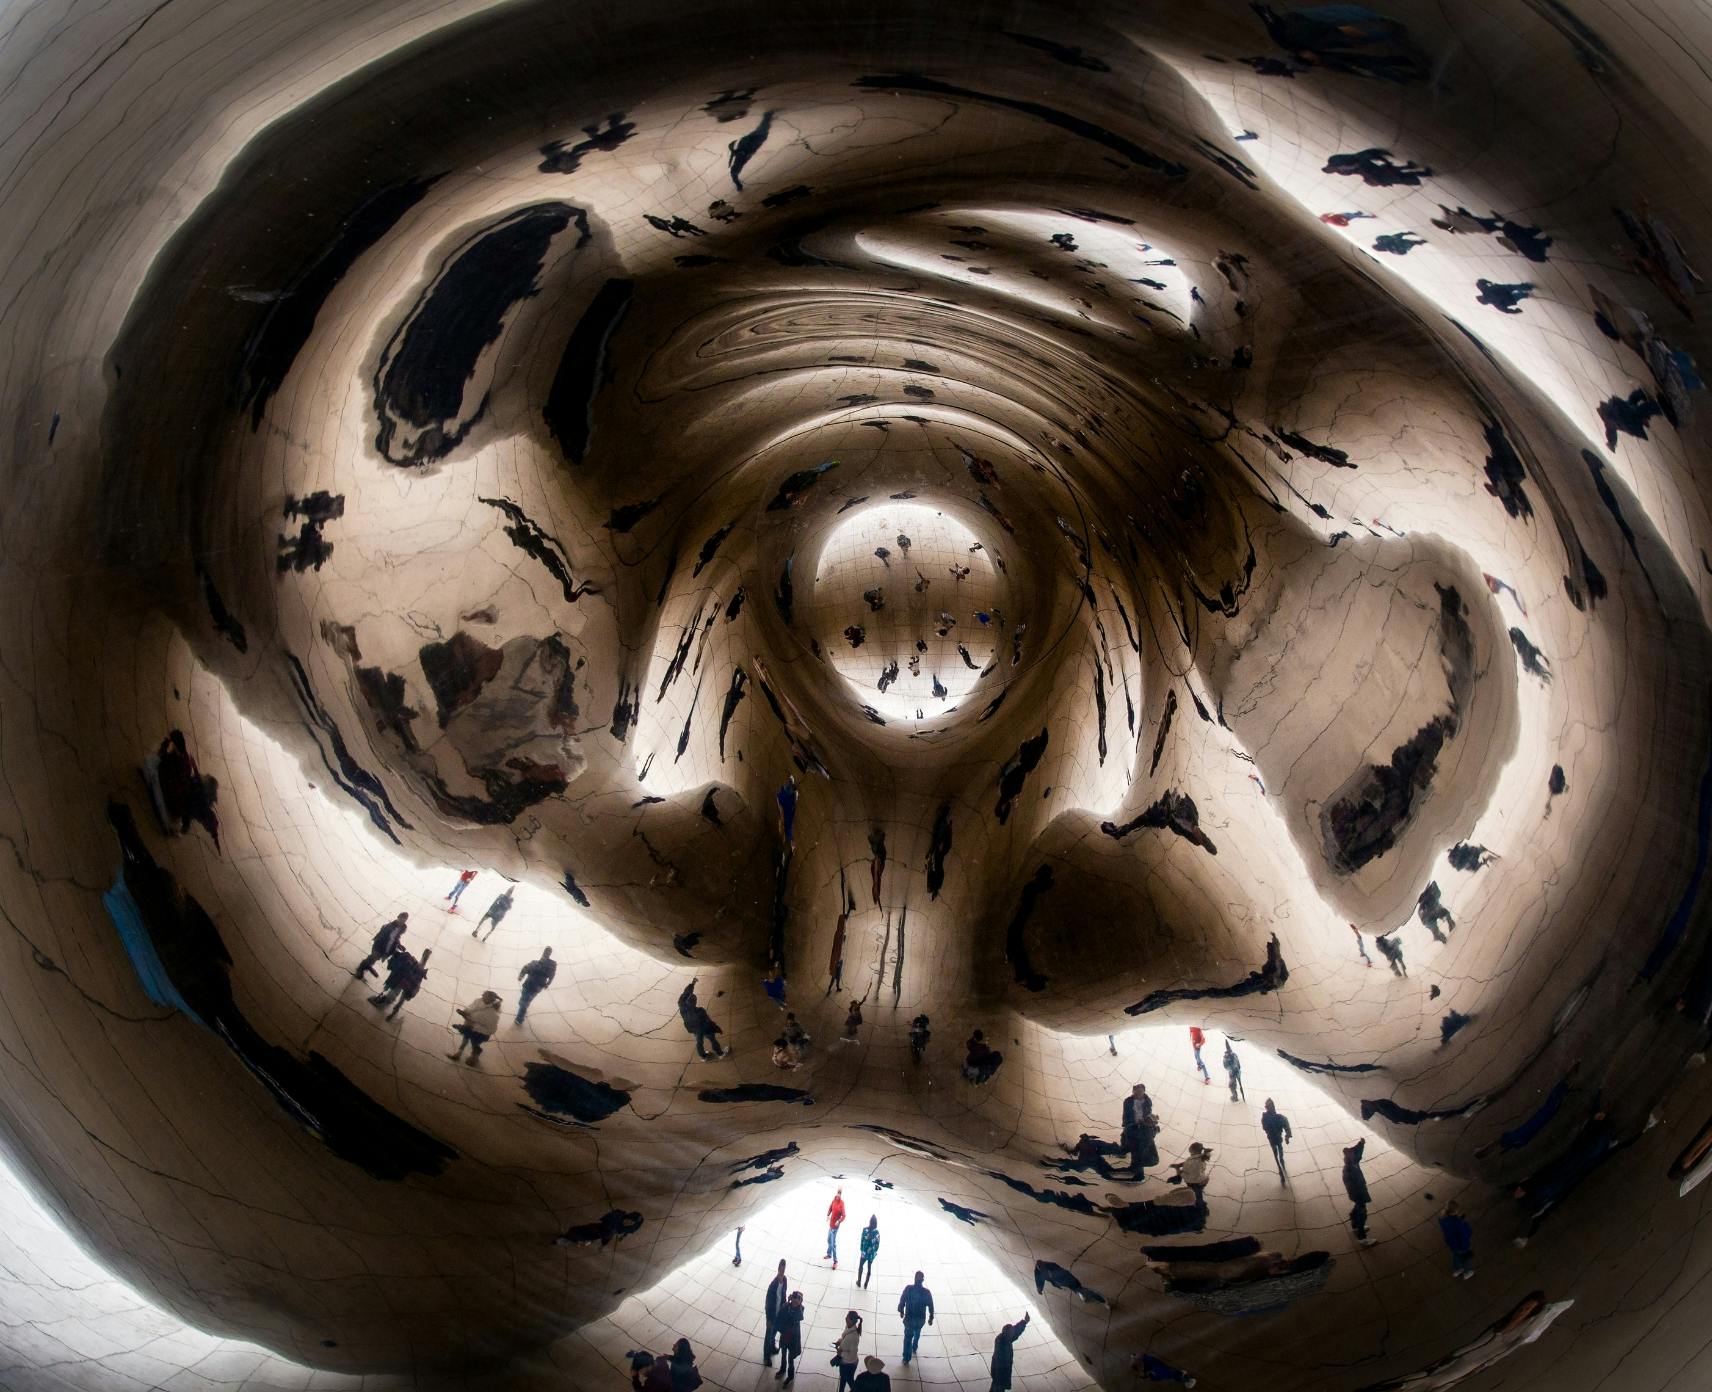 Distorted reflections of people in the Chicago Bean monument.